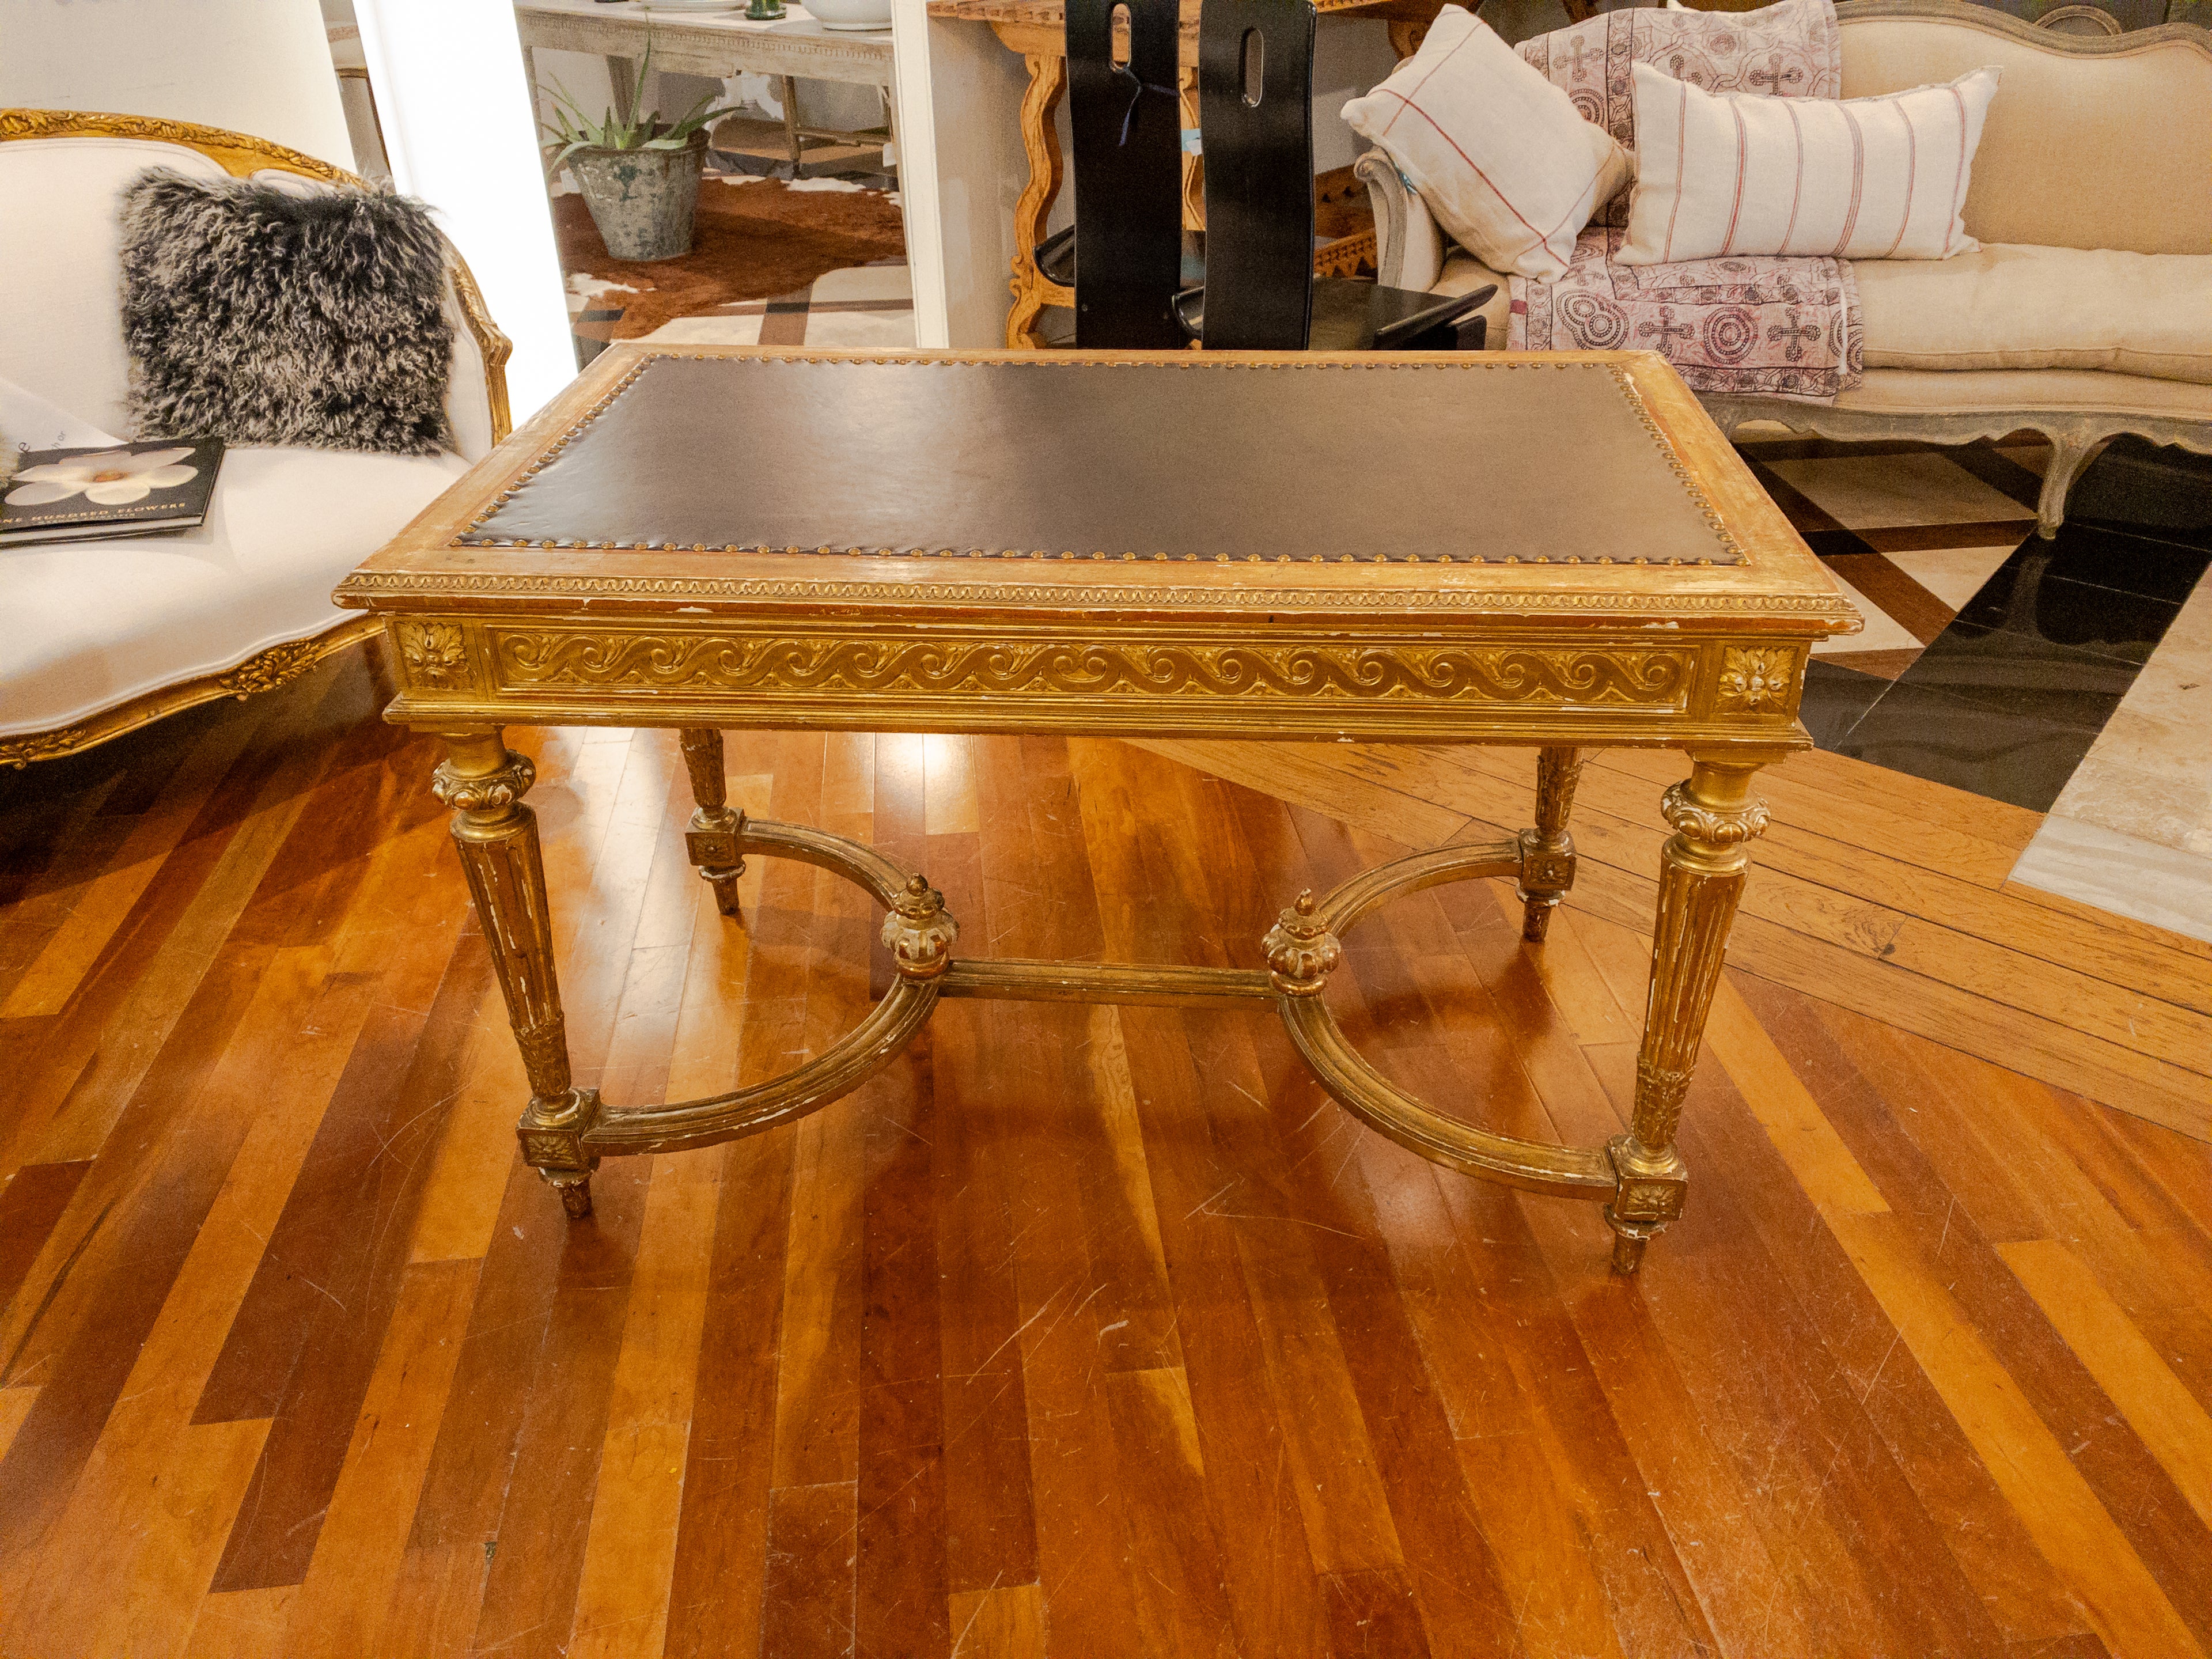 This 19th Century Empire Style Gold Leaf Library Table/Desk is a truly exquisite piece of furniture that exudes timeless elegance and sophistication. Crafted in the opulent Empire style, it showcases the grandeur and luxury associated with this